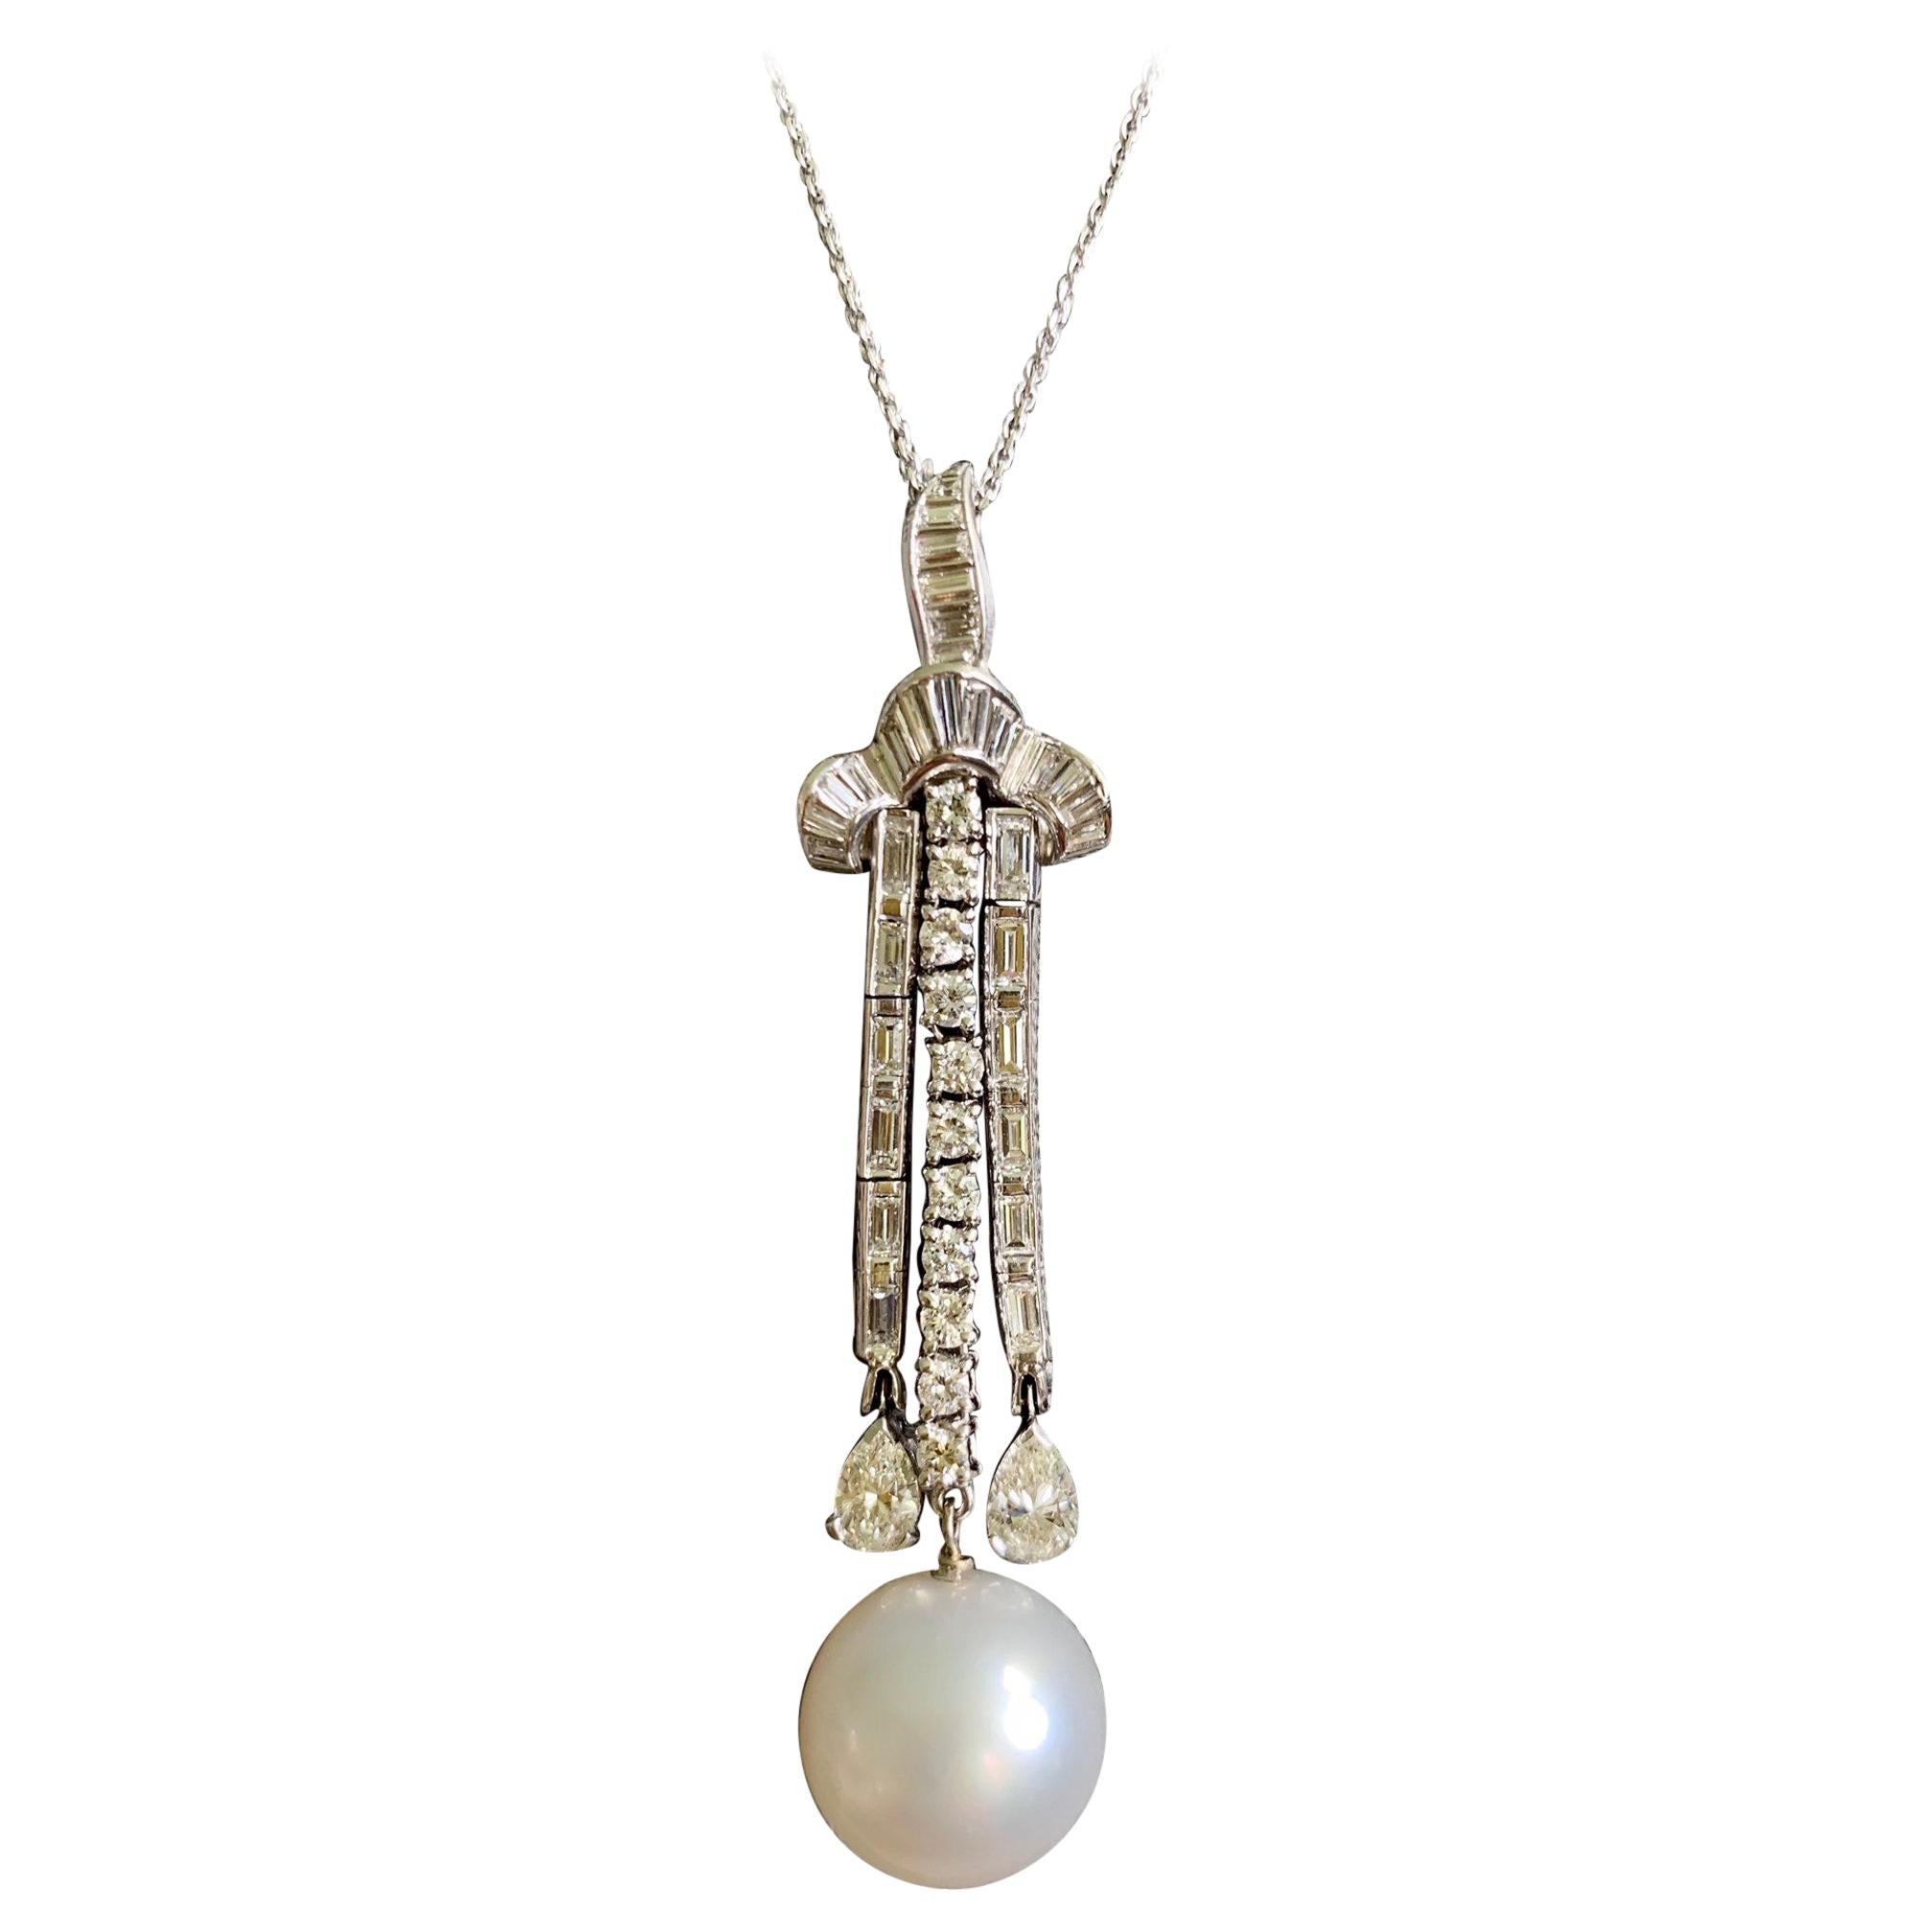 This spectacular Platinum Lavalier pendant has three dangly strands of diamonds, one of which in the center, leads to a large round pearl at the end of the strand of diamonds.  The other two strands of diamonds lead to nice pear-shaped diamonds. 